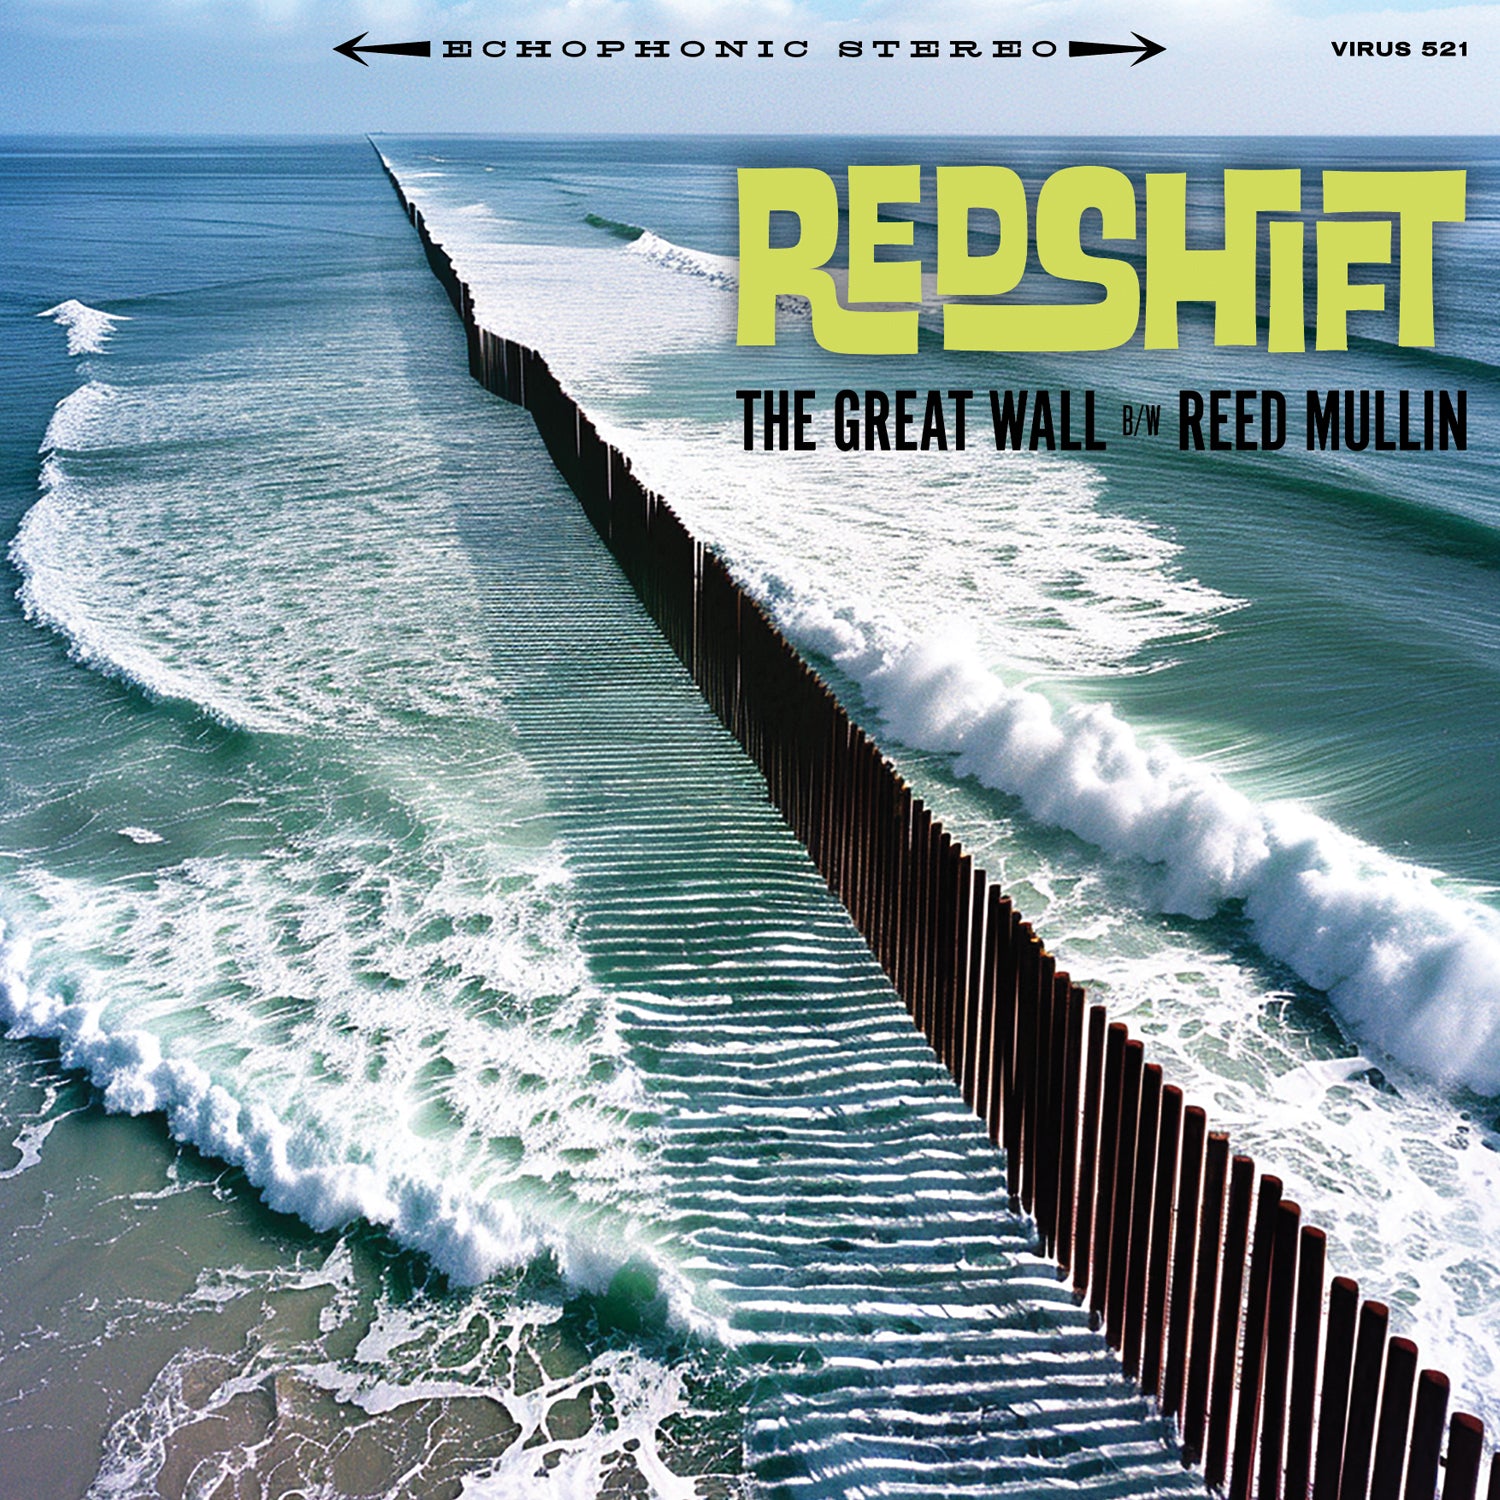 v521 - Redshift - "The Great Wall b/w Reed Mullin"